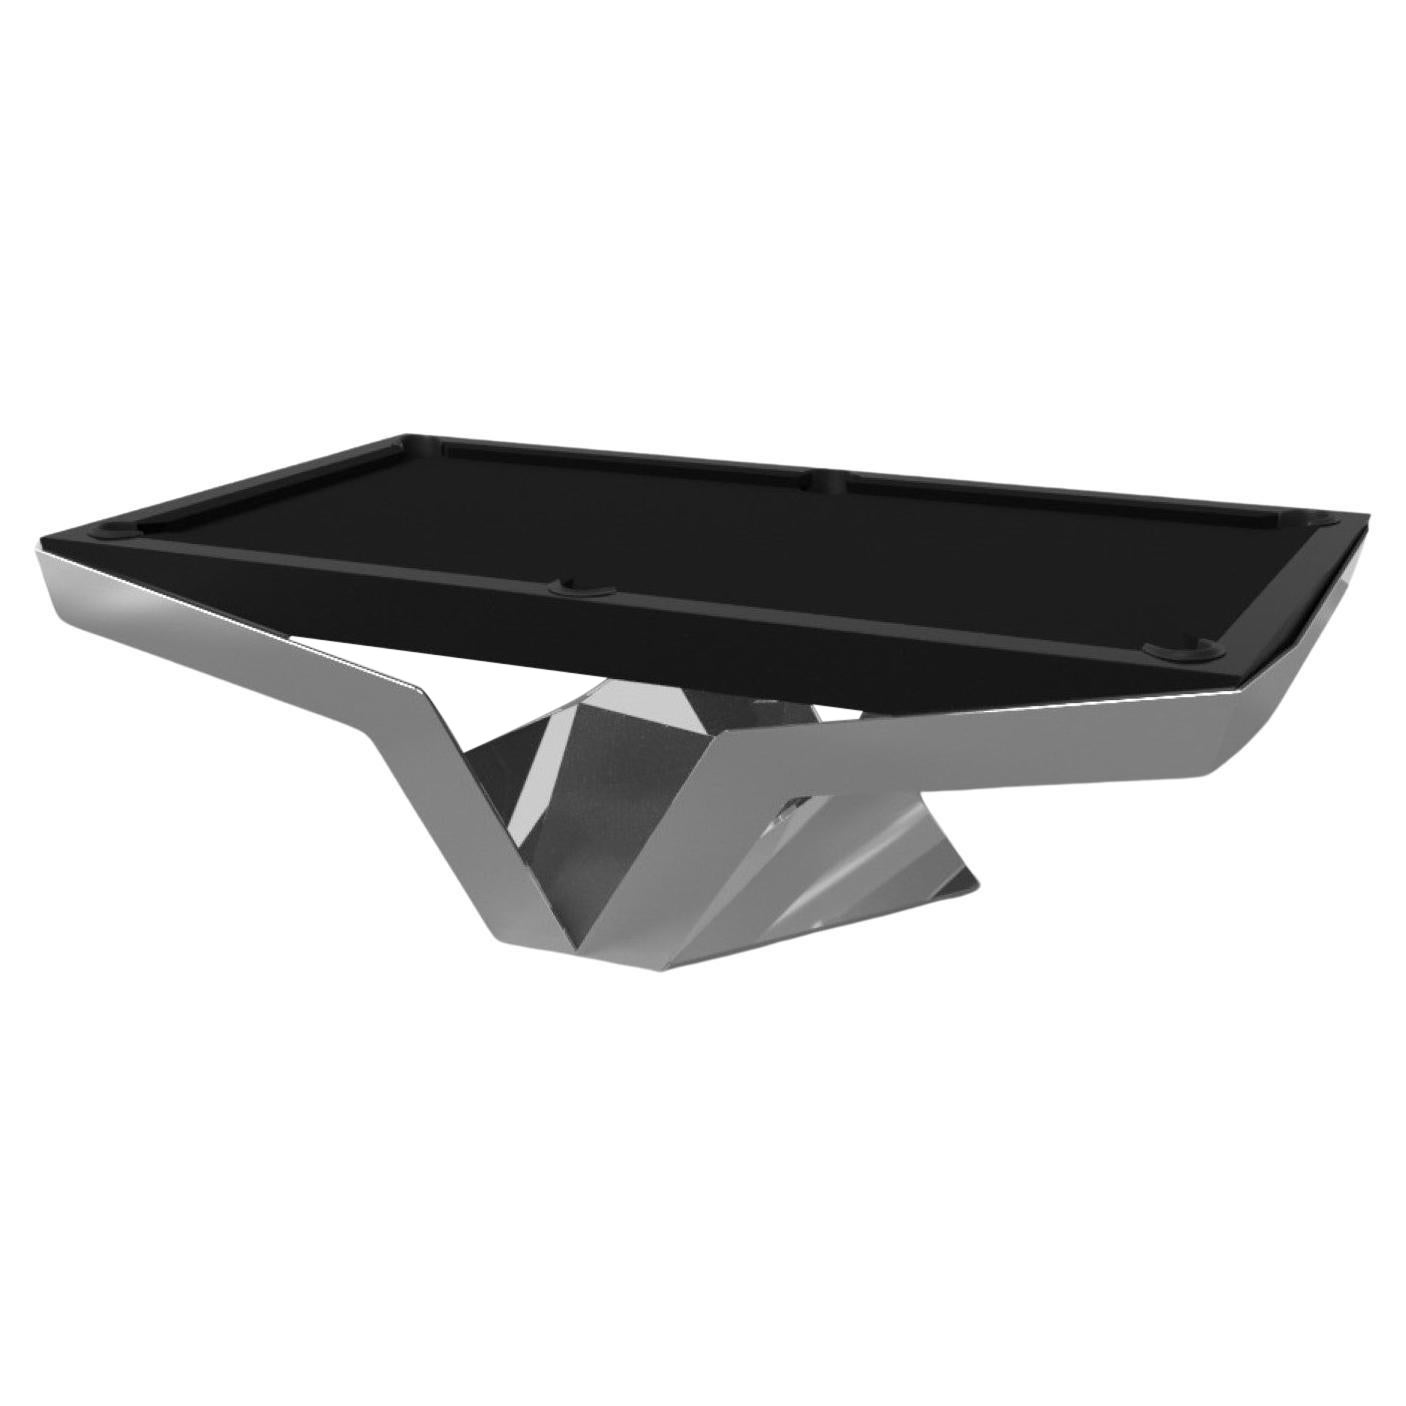 Elevate Customs Enzo Pool Table / Stainless Steel Metal in 9' - Made in USA For Sale